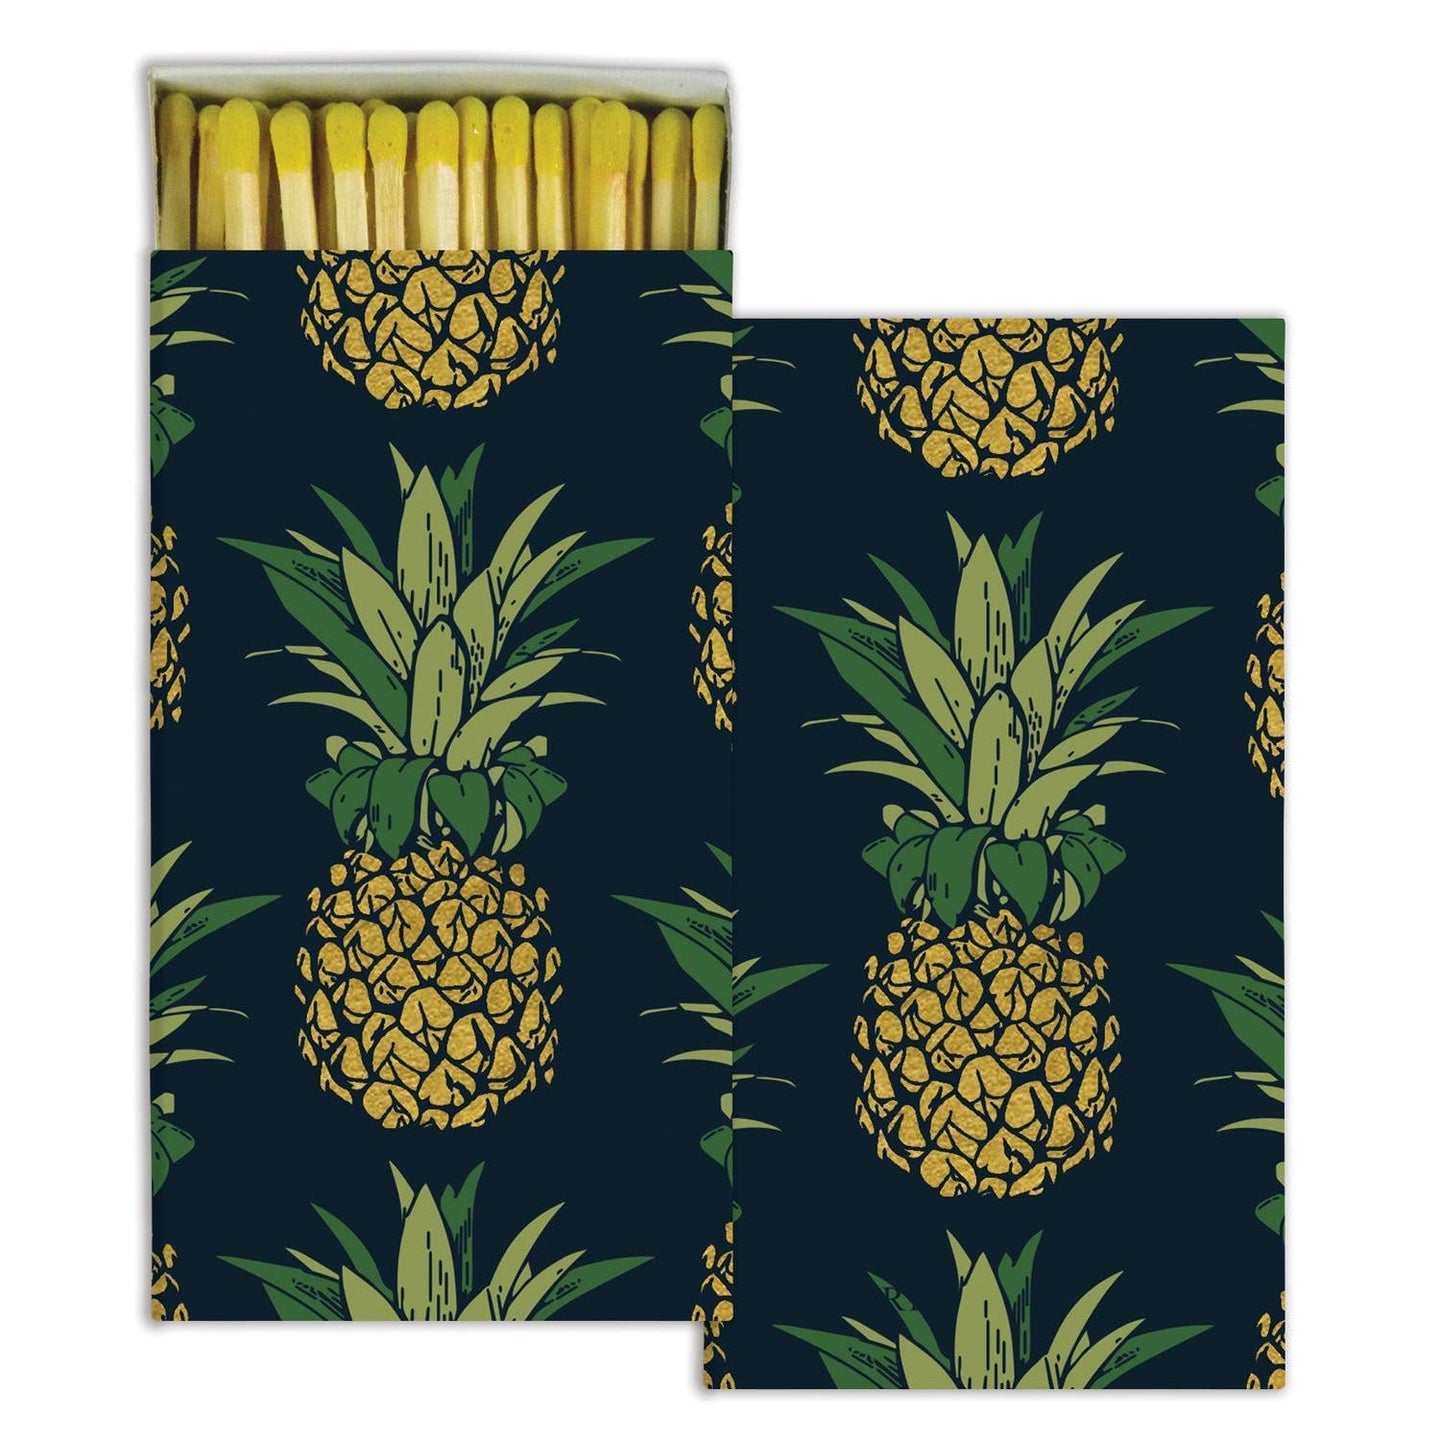 Matches - Pineapple